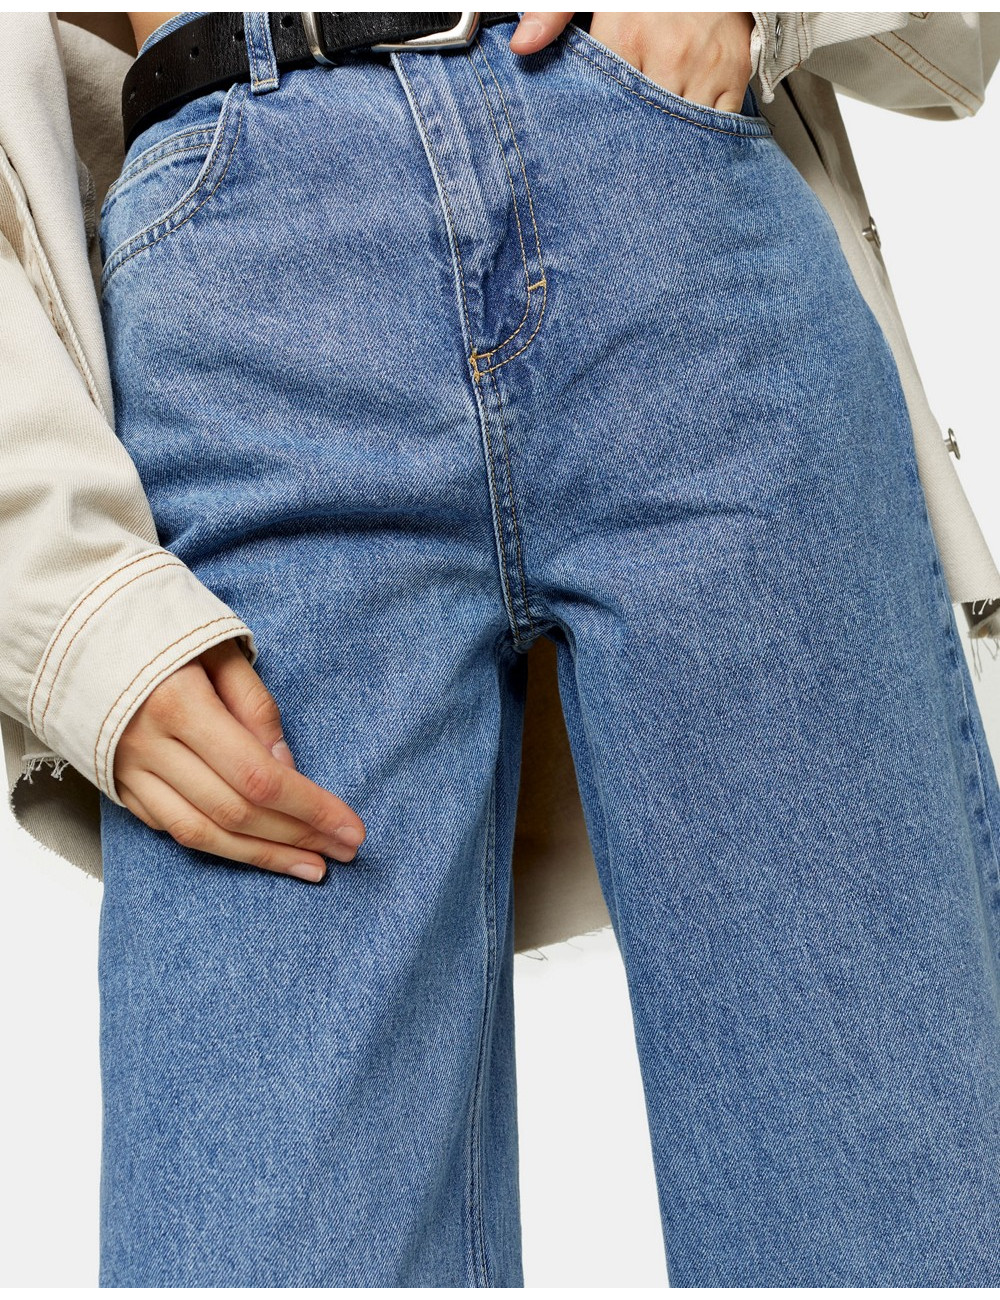 Topshop relaxed fit jeans...